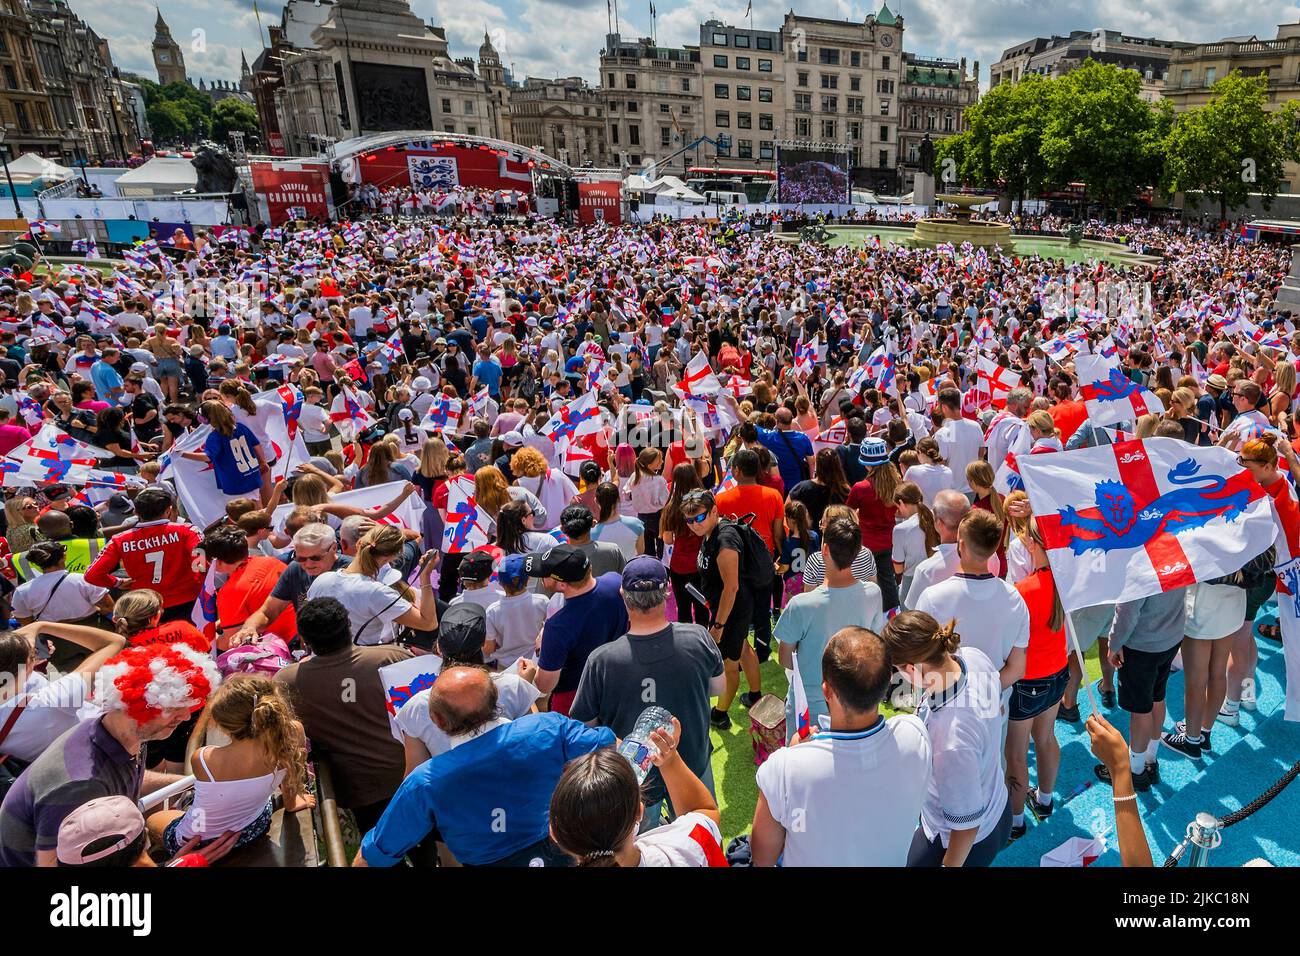 London, UK. 1st Aug, 2022. England celebration after winning the UEFA Women's EURO 2022 final. The event in Trafalgar Square was organised by the FA, the Mayor of London Sadiq Khan, and tournament organisers. It offered free access for up to 7,000 supporters. Credit: Guy Bell/Alamy Live News Stock Photo